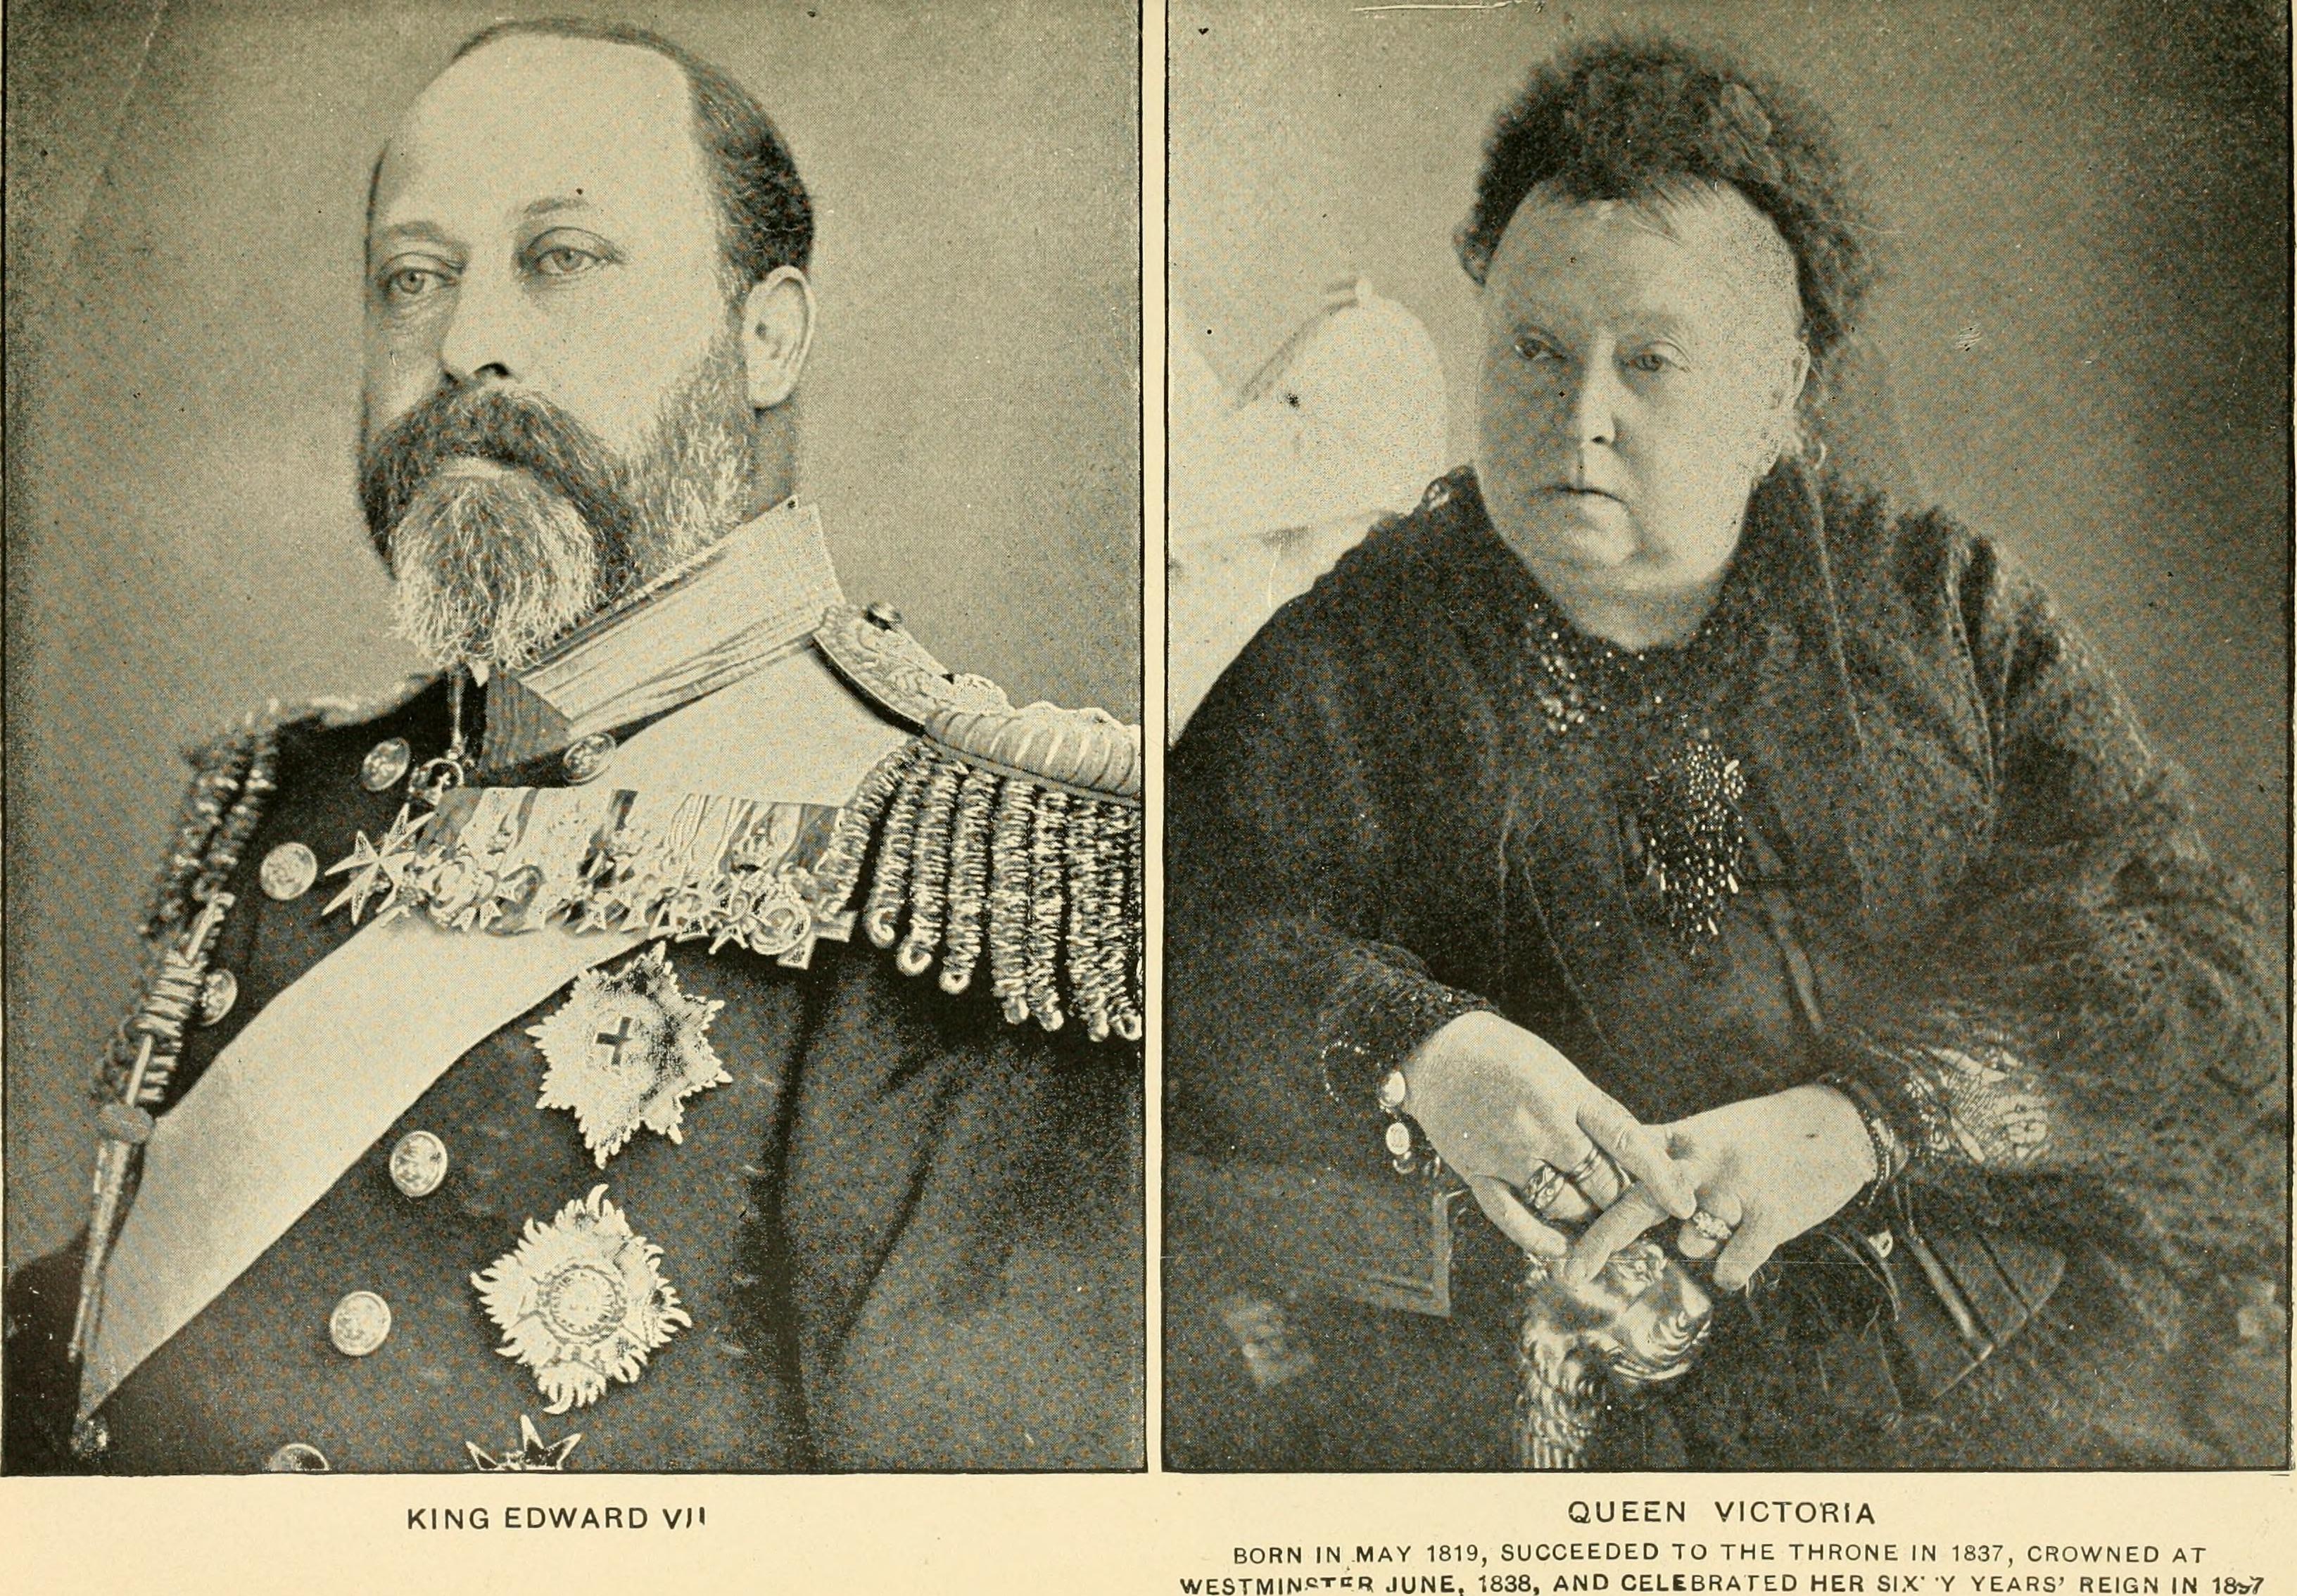 King Edward VII and Queen Victoria